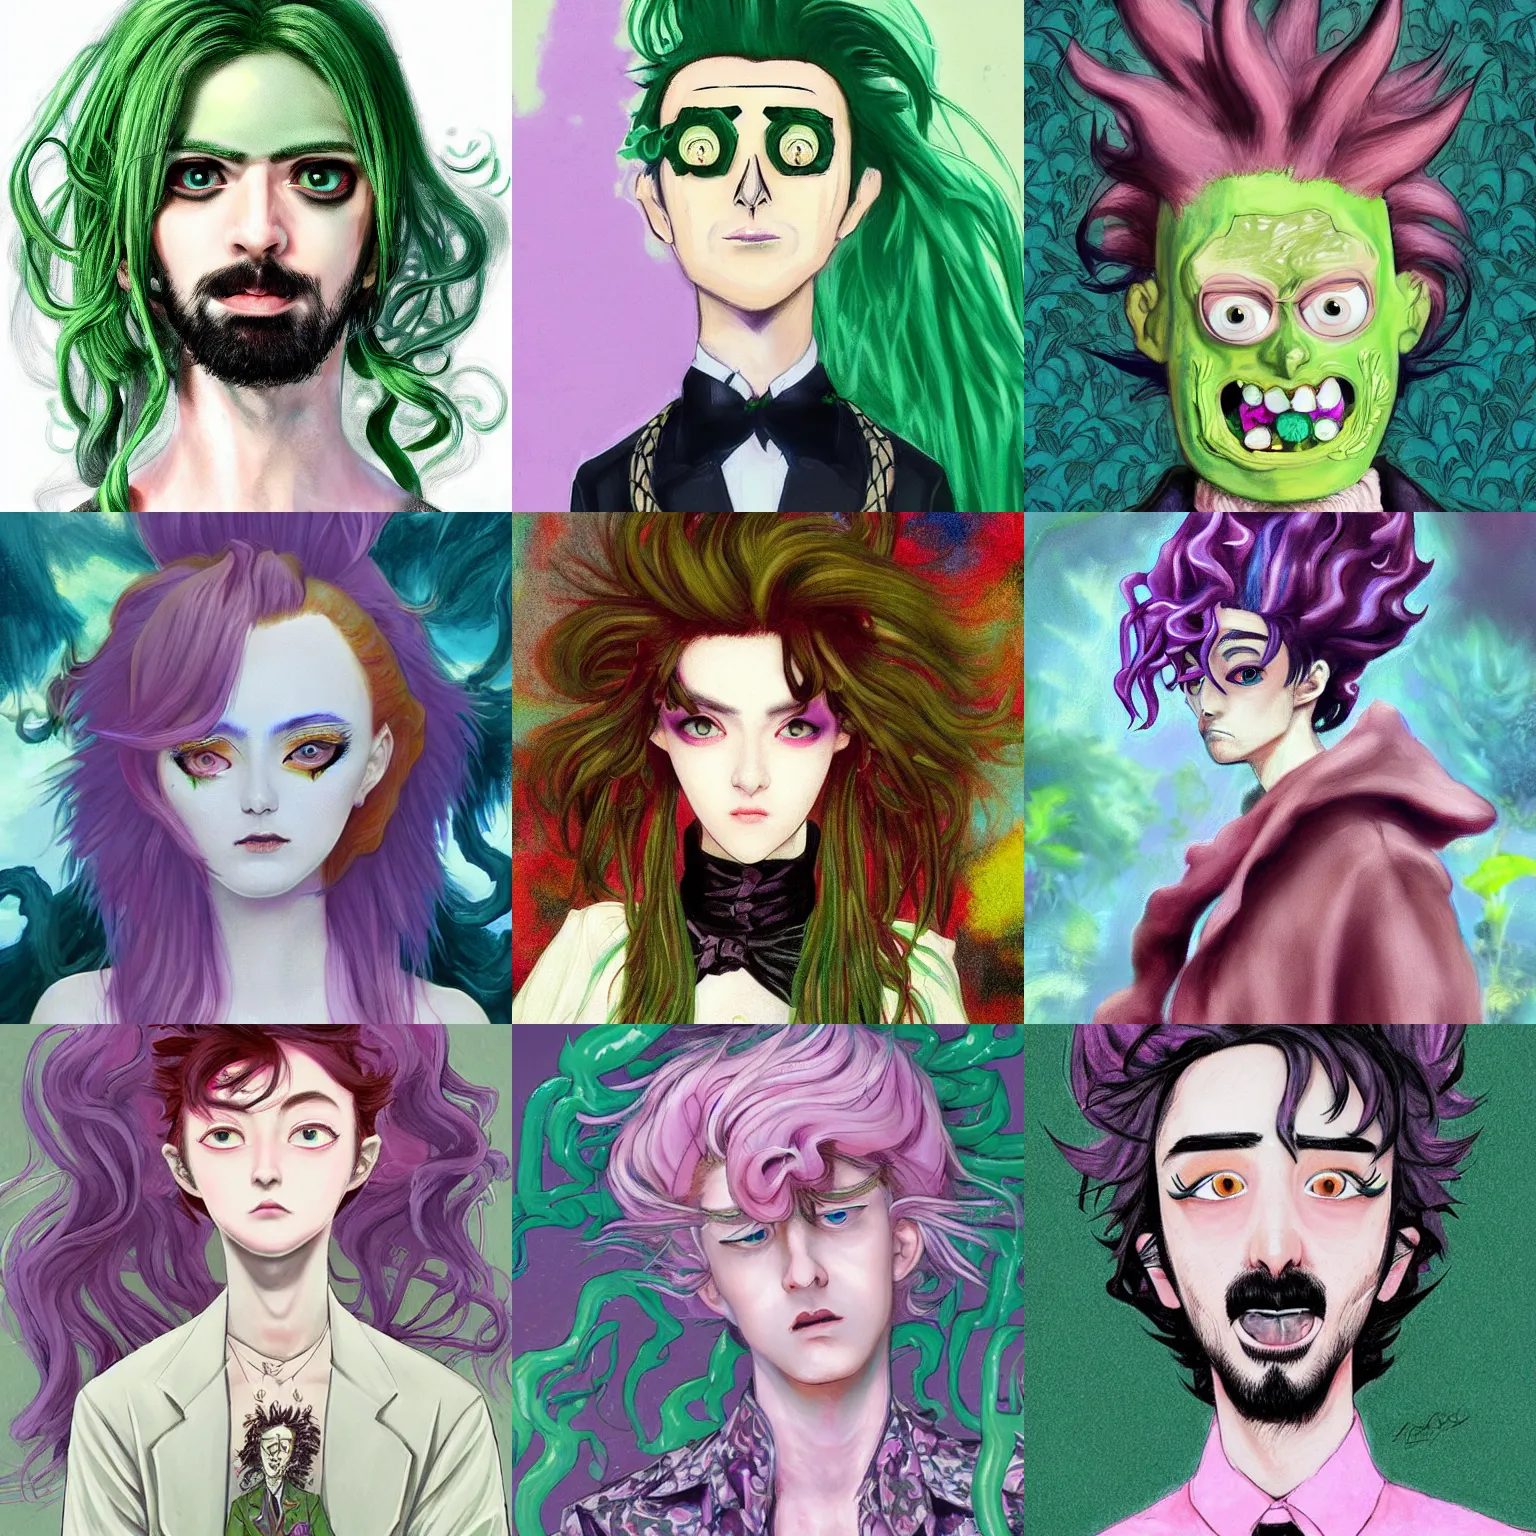 Prompt: Pickle Rick as a beautiful man, cool tousled hair, style is a blend of John singer Sargent paintings and Japanese shoujo manga, inspired by pastel goth, pre-raphaelite paintings, harajuku street fashion, photorealistic art, insanely beautiful and detailed illustration